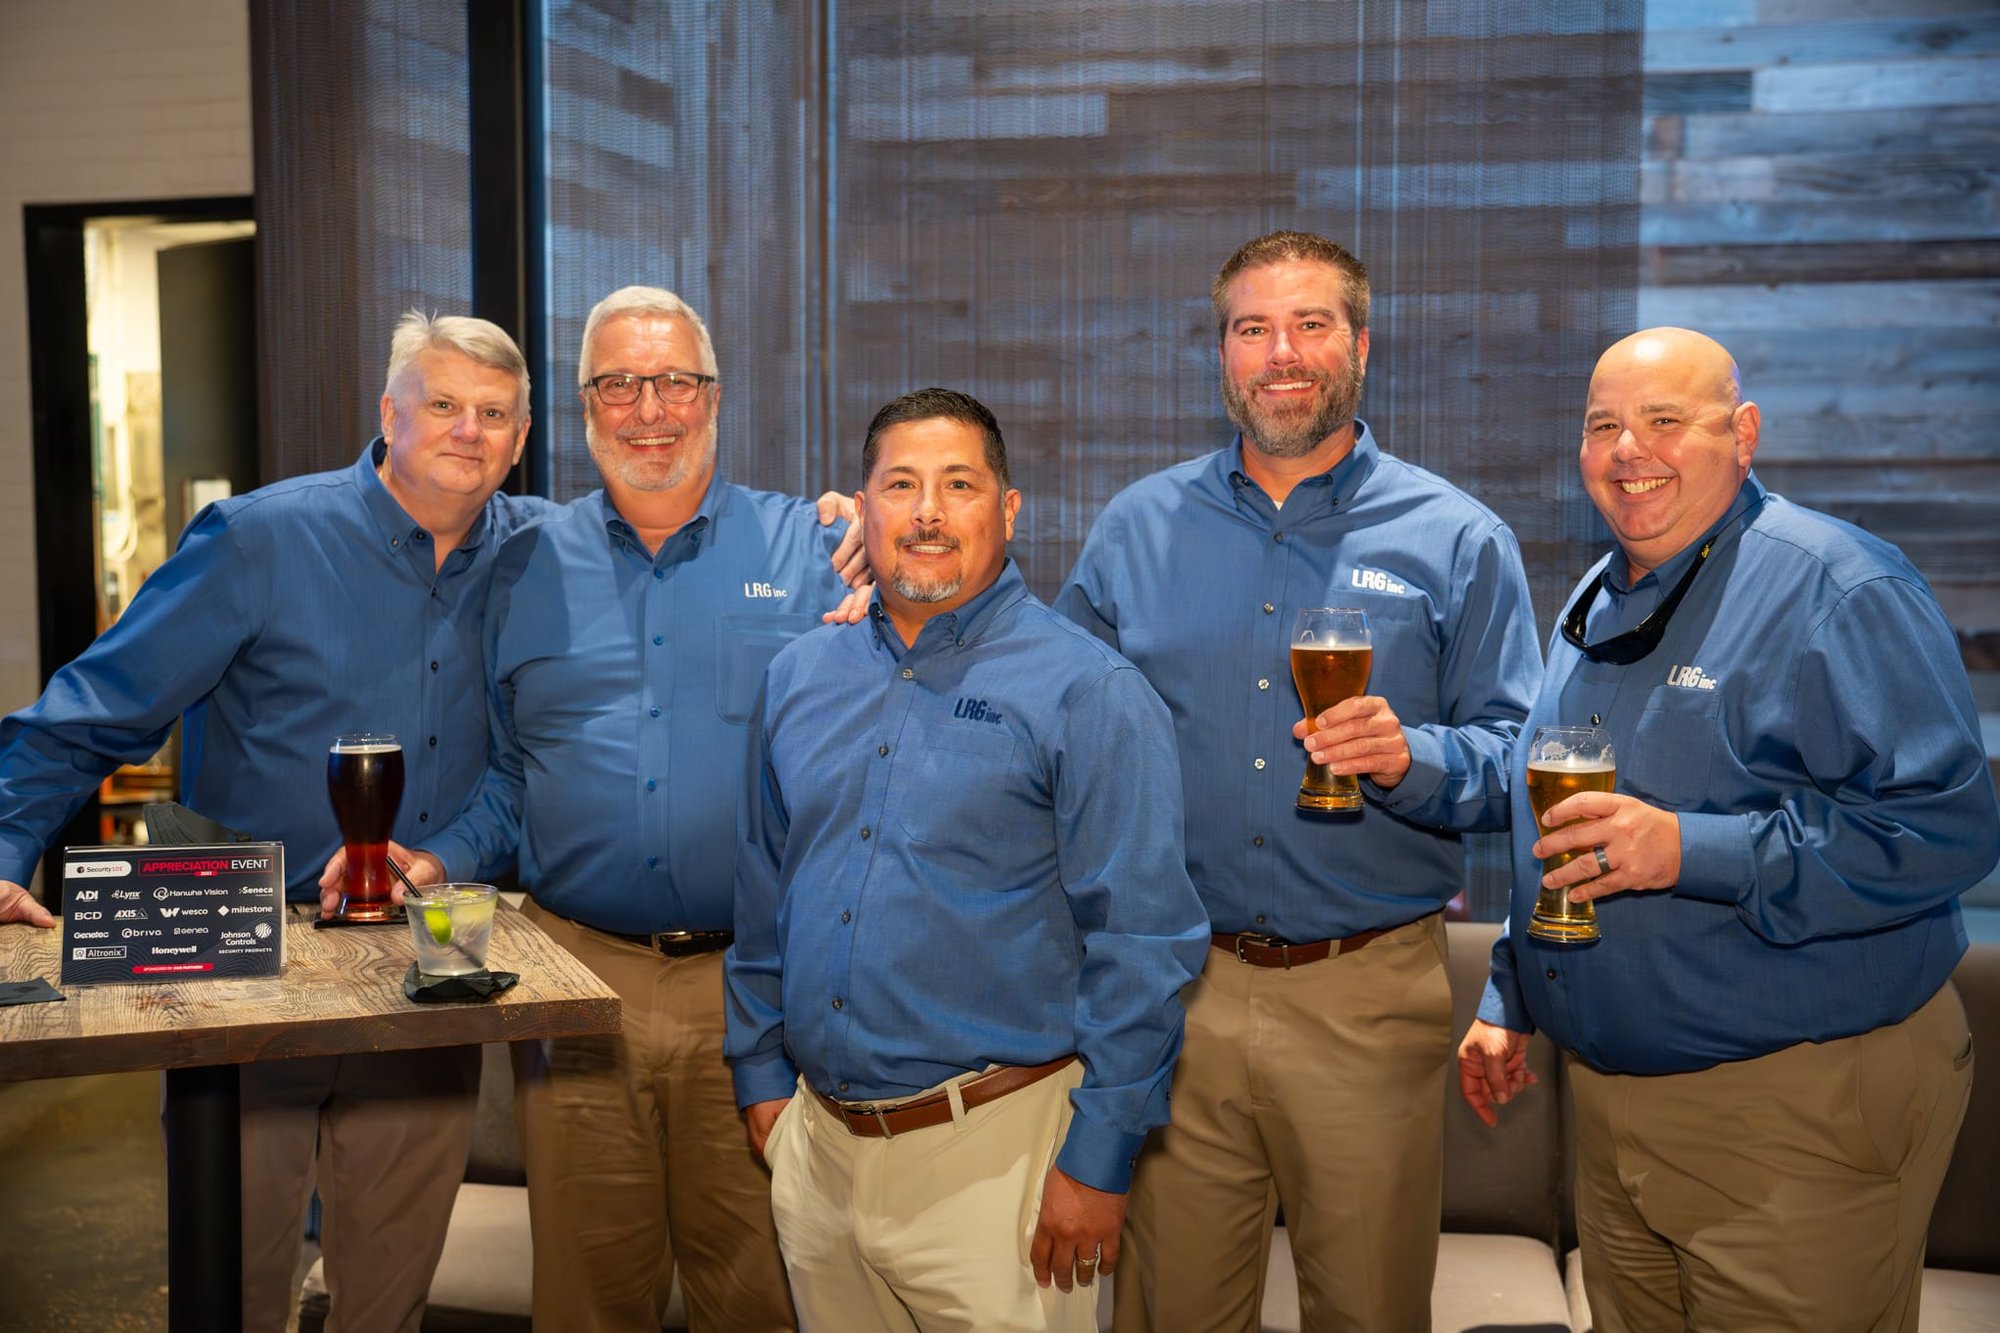 Candid shot of attendees of Security 101 Appreciation Event at Happiest Hour in Dallas, TX